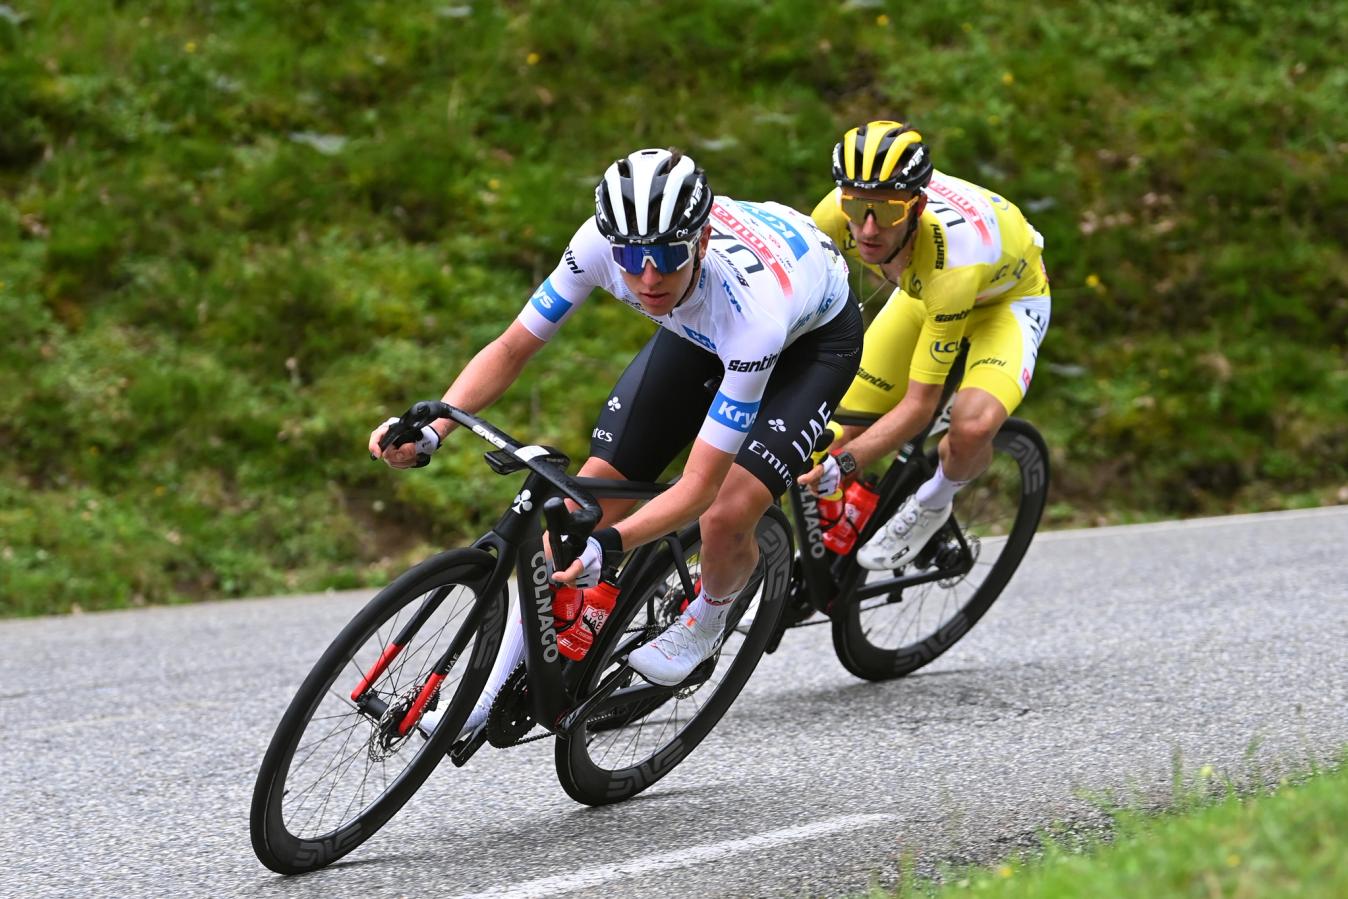 In Tadej Pogačar and Adam Yates, UAE Team Emirates arguably have the strongest pair of co-leaders in the peloton